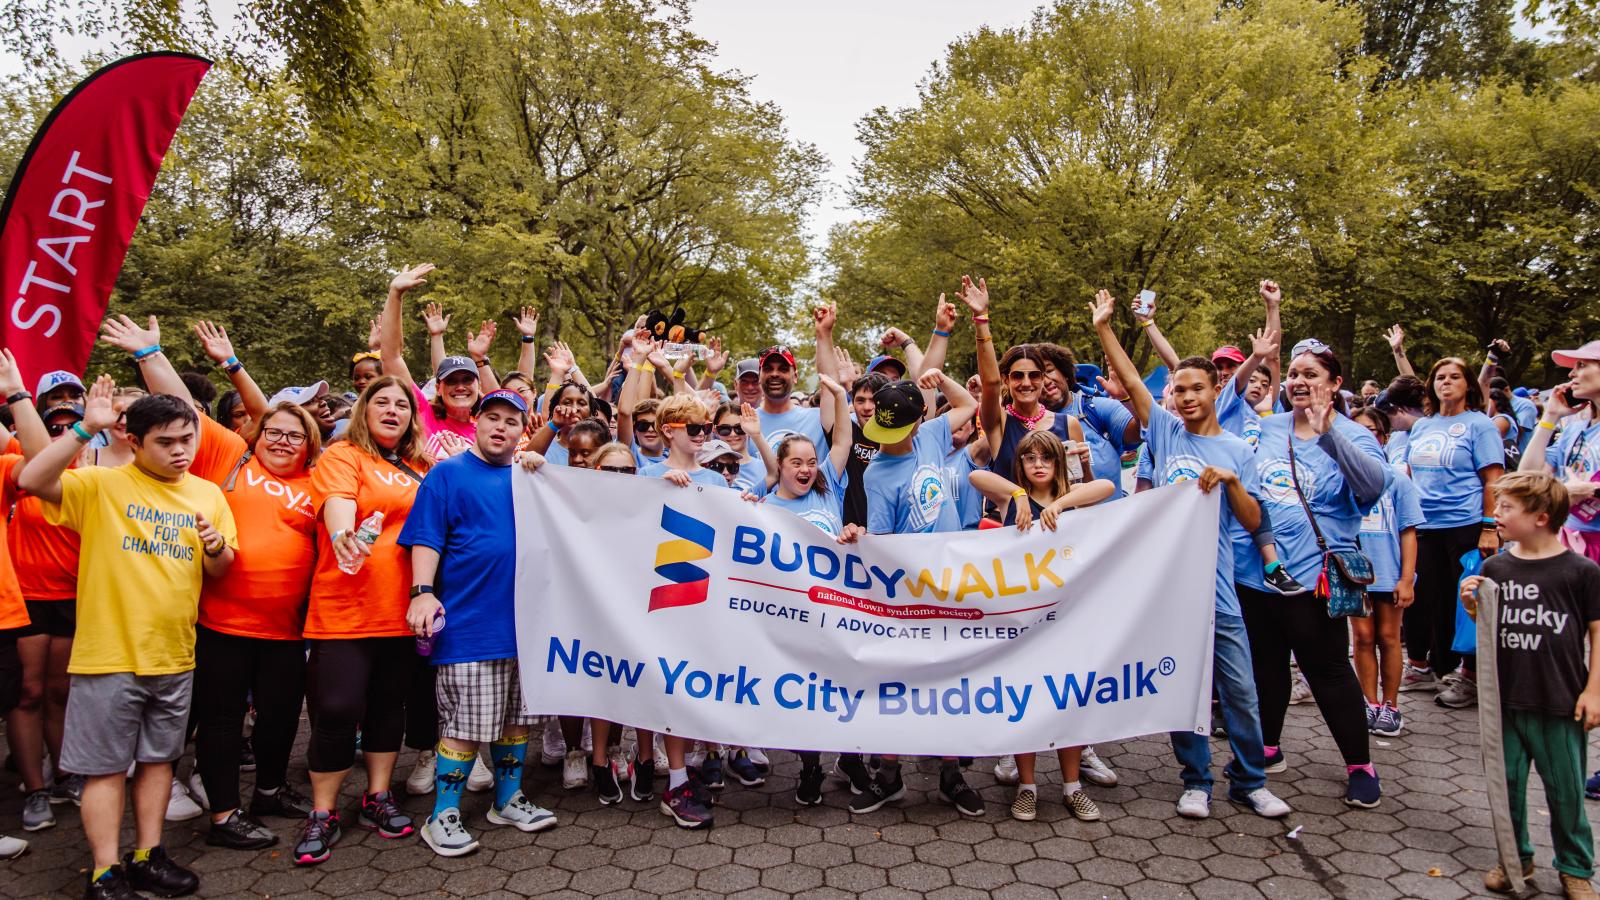 Start of the Buddy Walk with Grand Marshals holding the NYC Buddy Walk sign